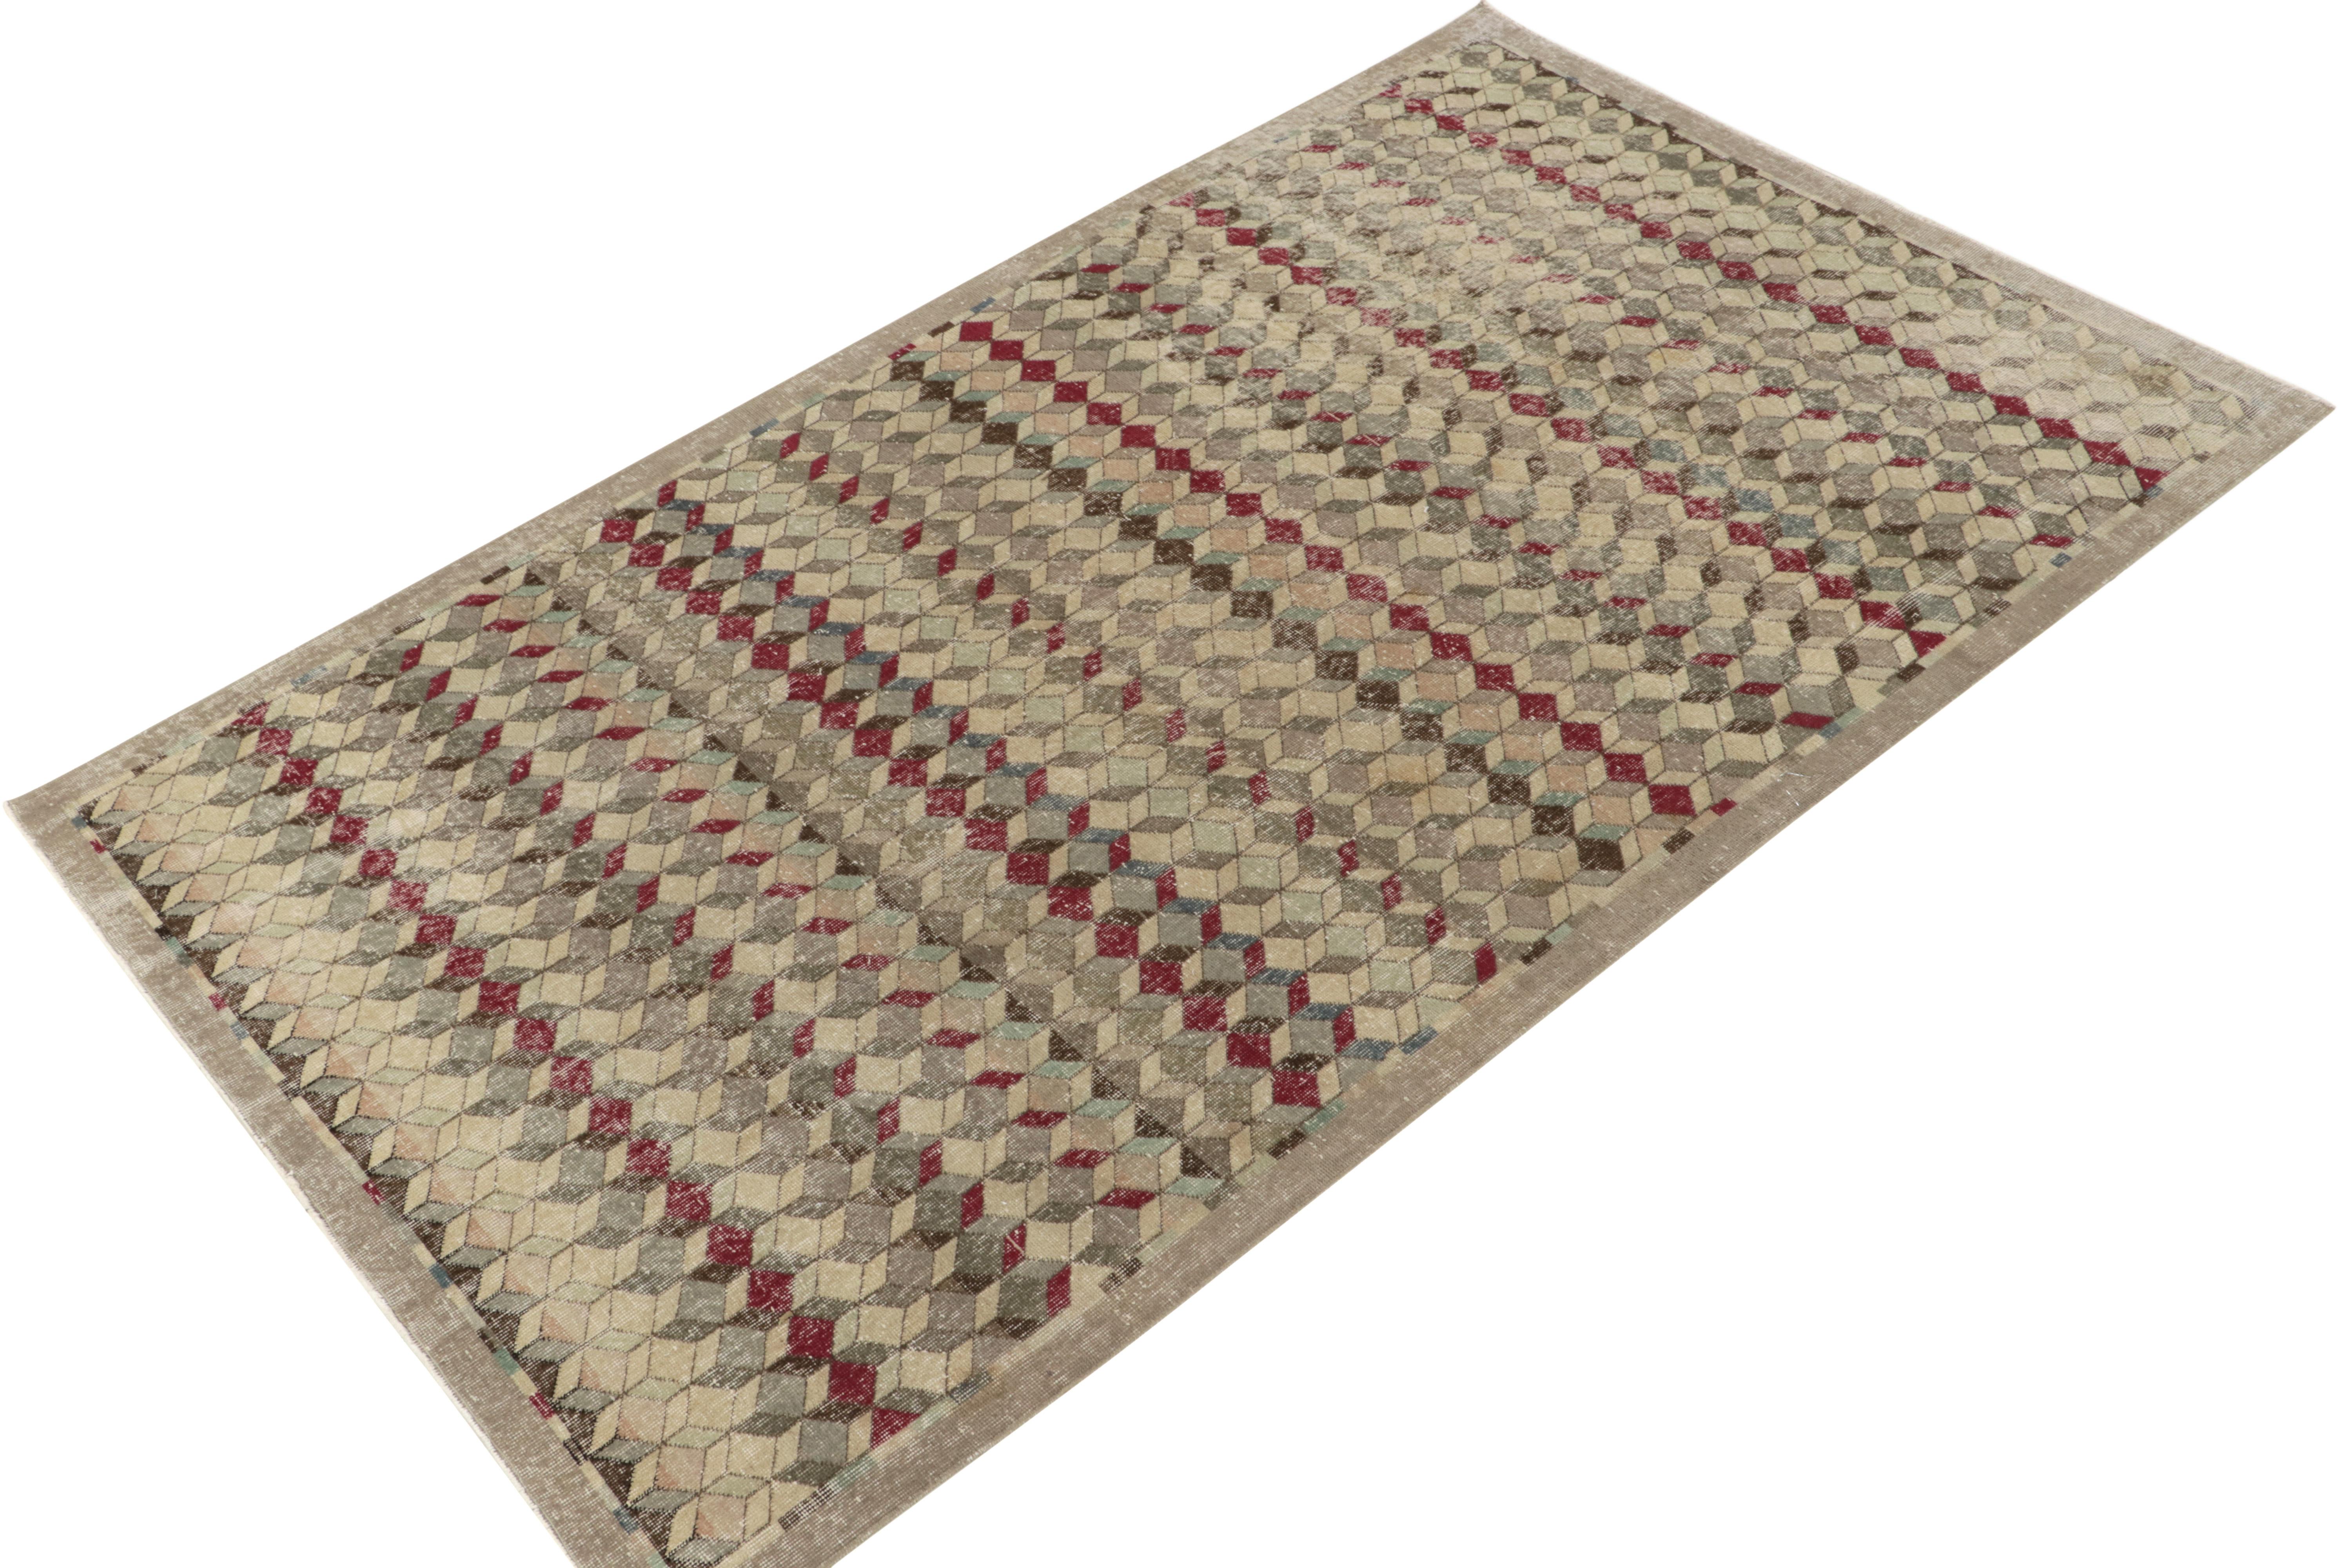 A 6x10 vintage rug exemplifying bold Turkish art deco sensibilities, among the latest to join our Mid Century Pasha Collection. 

Coming from an innovative Turkish designer, this 1960s piece features movement with a depthful geometric pattern in